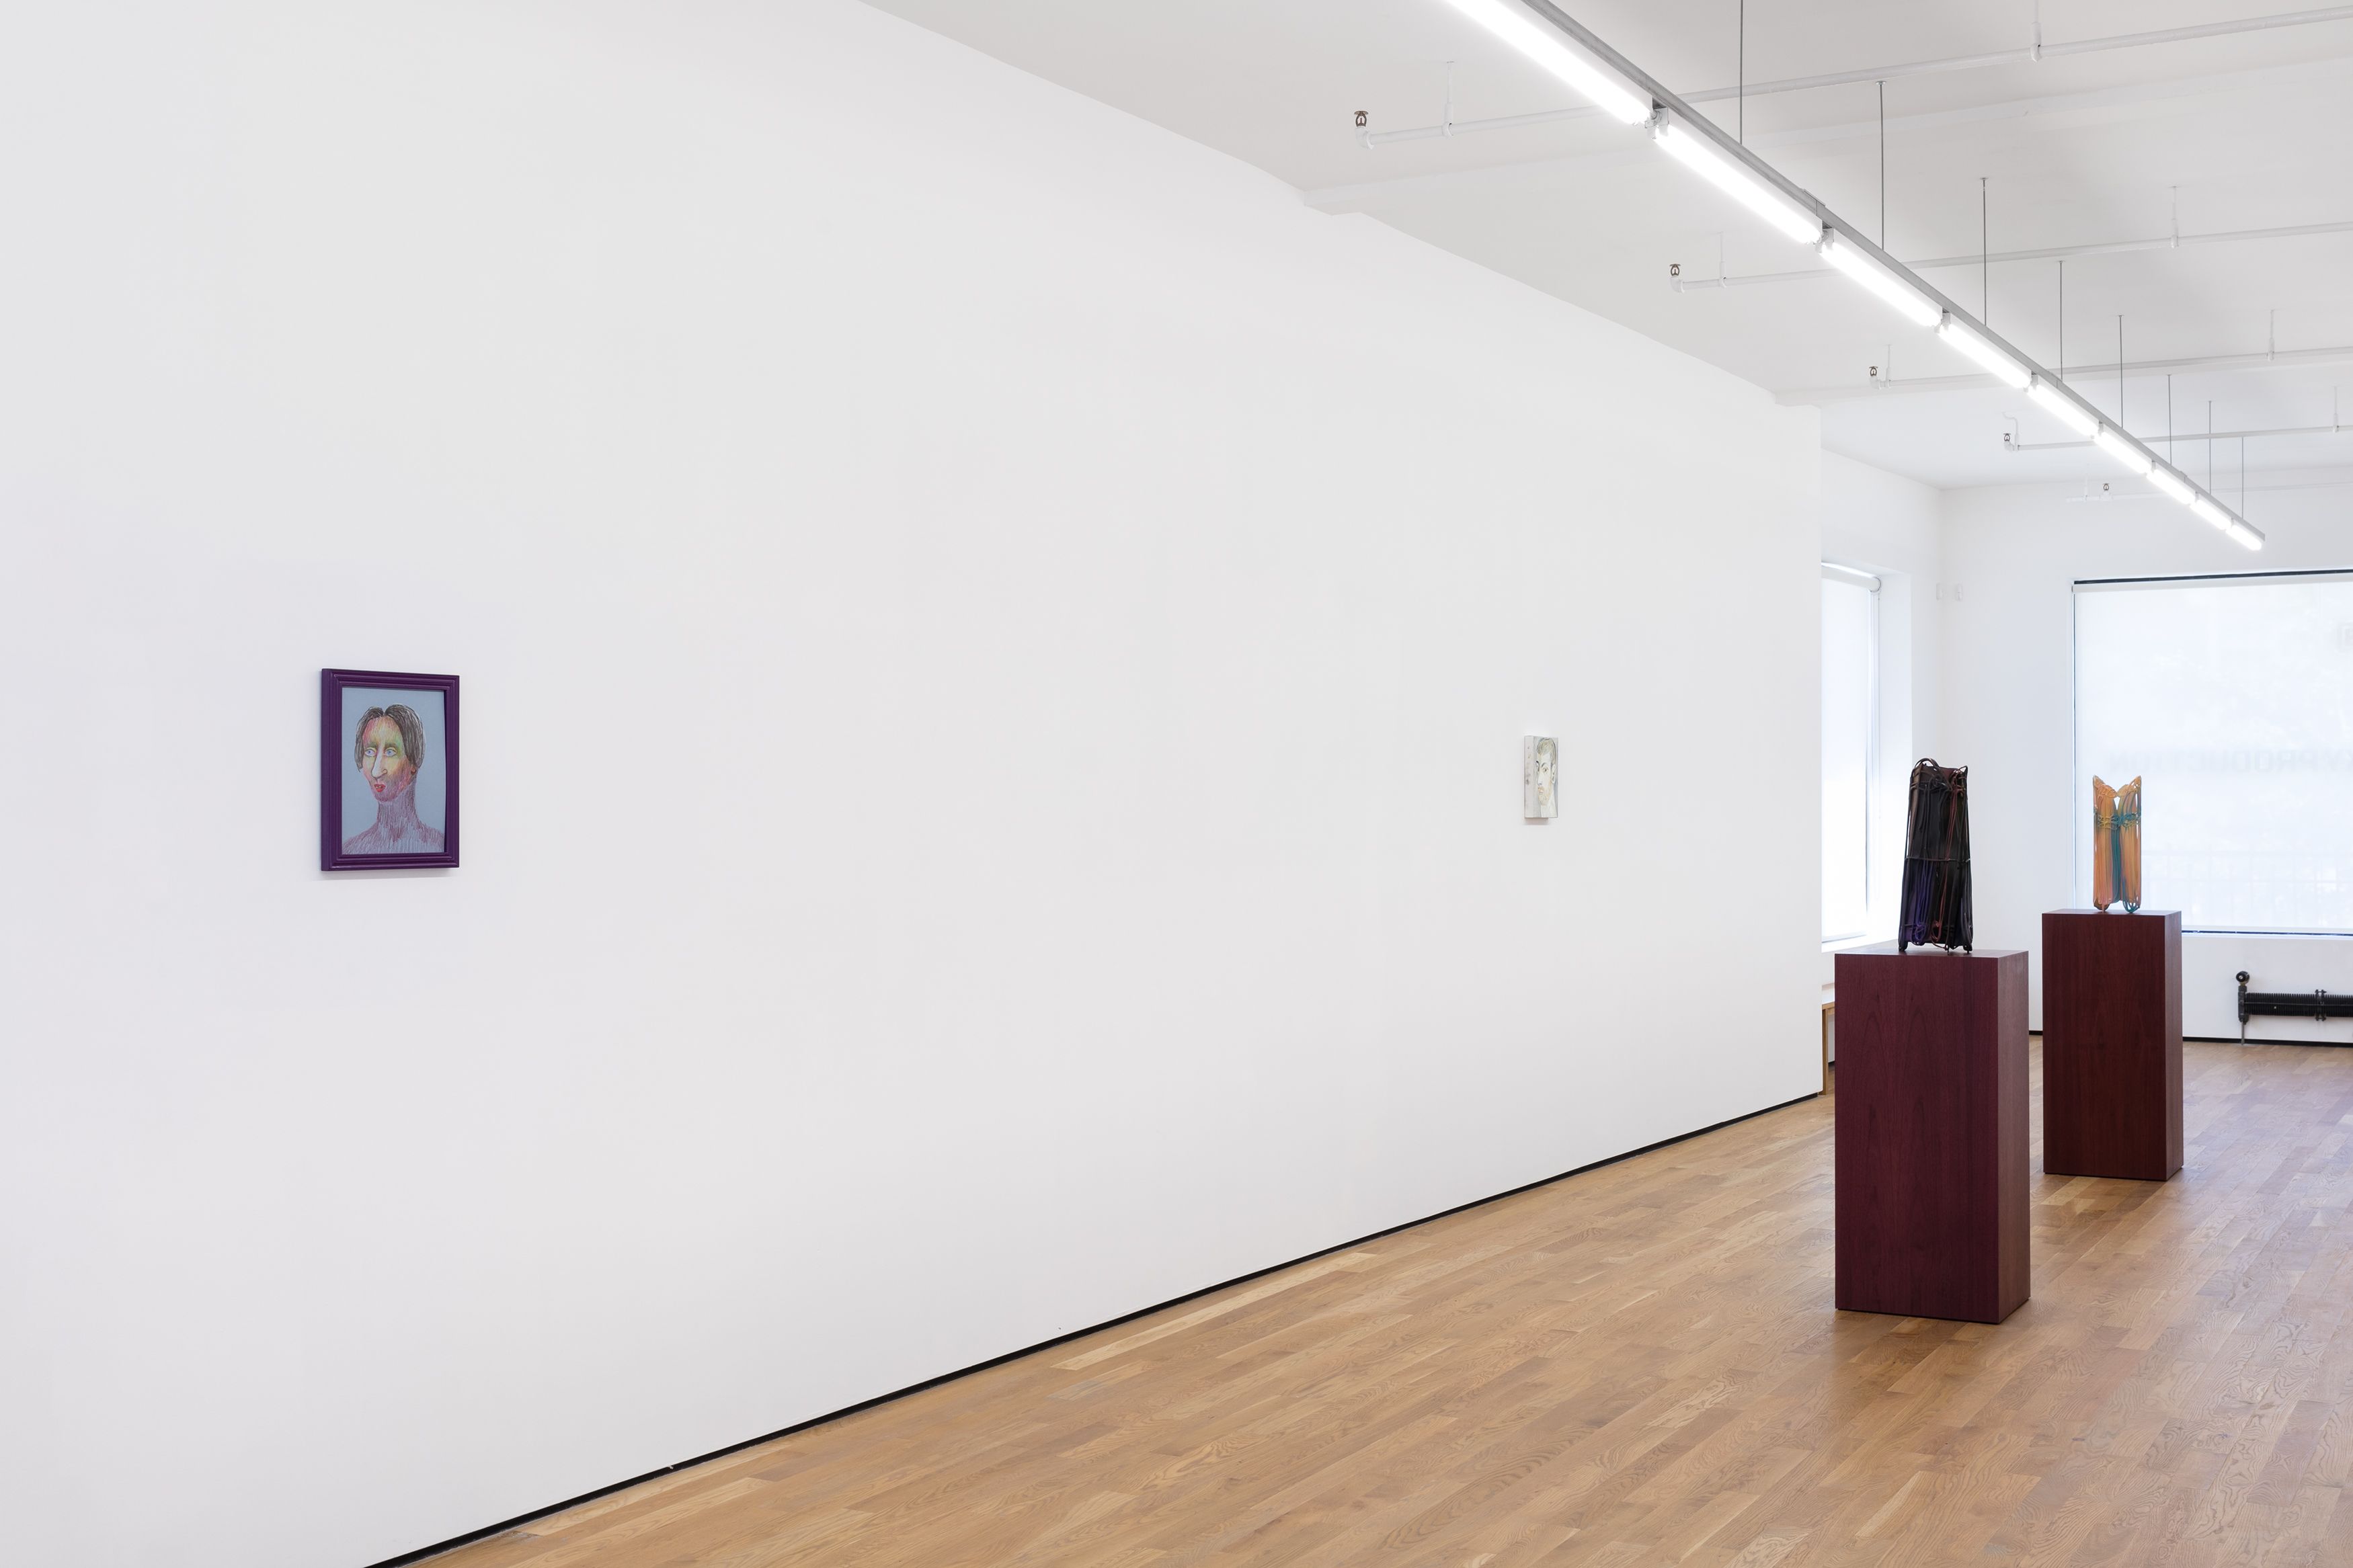 Design For Living, 2018, installation view, Foxy Production, New York